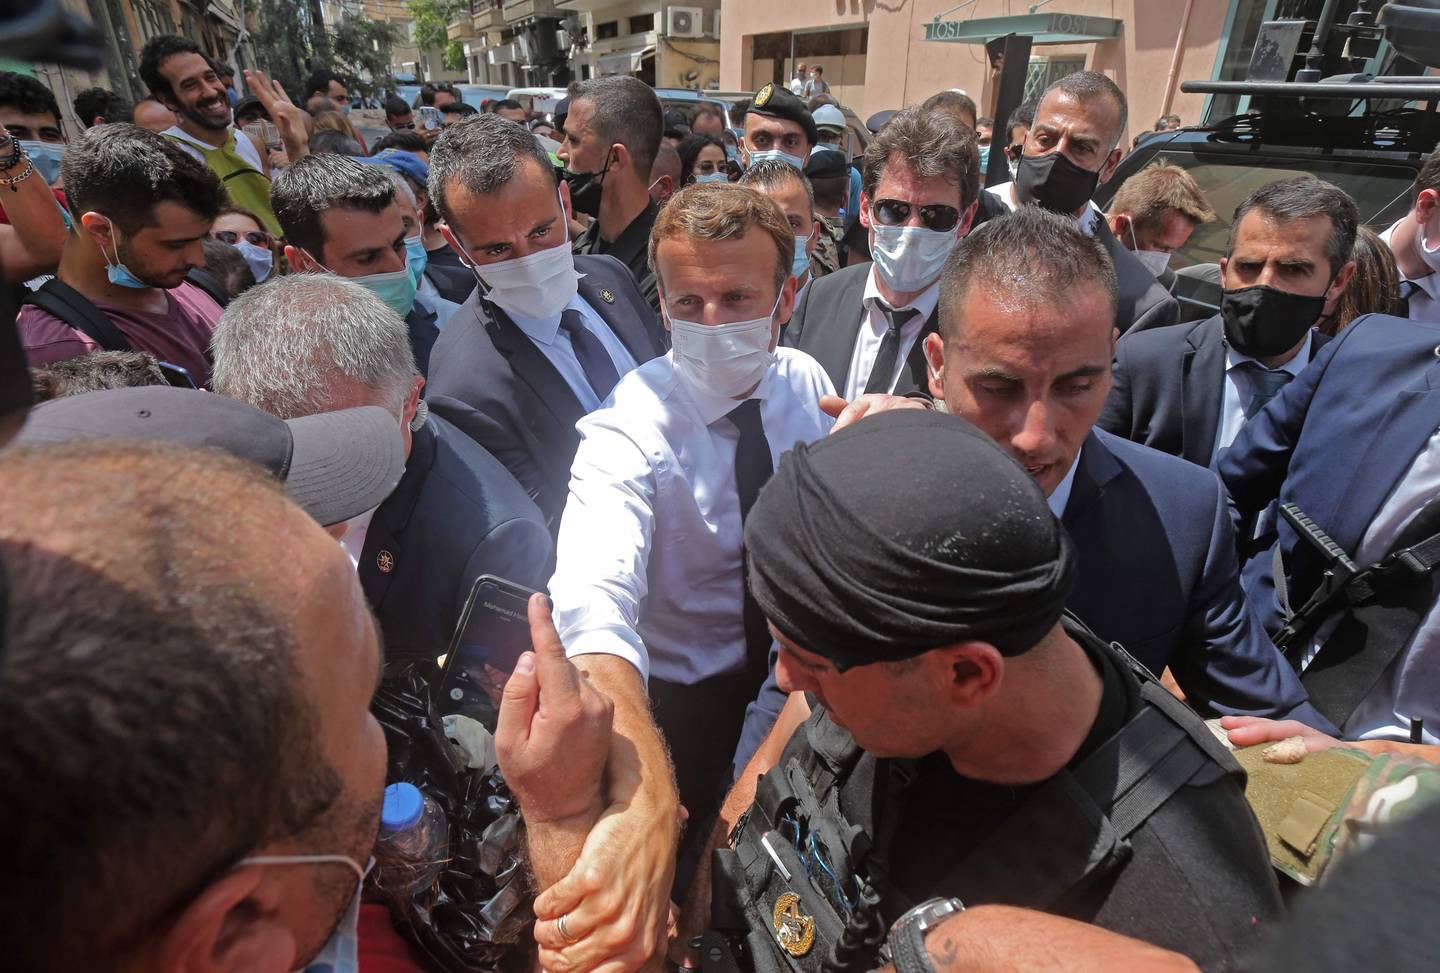 French President Emmanuel Macron greets people as he visits the Gemmayzeh neighborhood which has suffered extensive damage due to a massive explosion in the Lebanese capital, on August, 6. 2020. - French President Emmanuel Macron visited shell-shocked Beirut, pledging support and urging change after a massive explosion devastated the Lebanese capital in a disaster that has sparked grief and fury. (Photo by - / AFP)